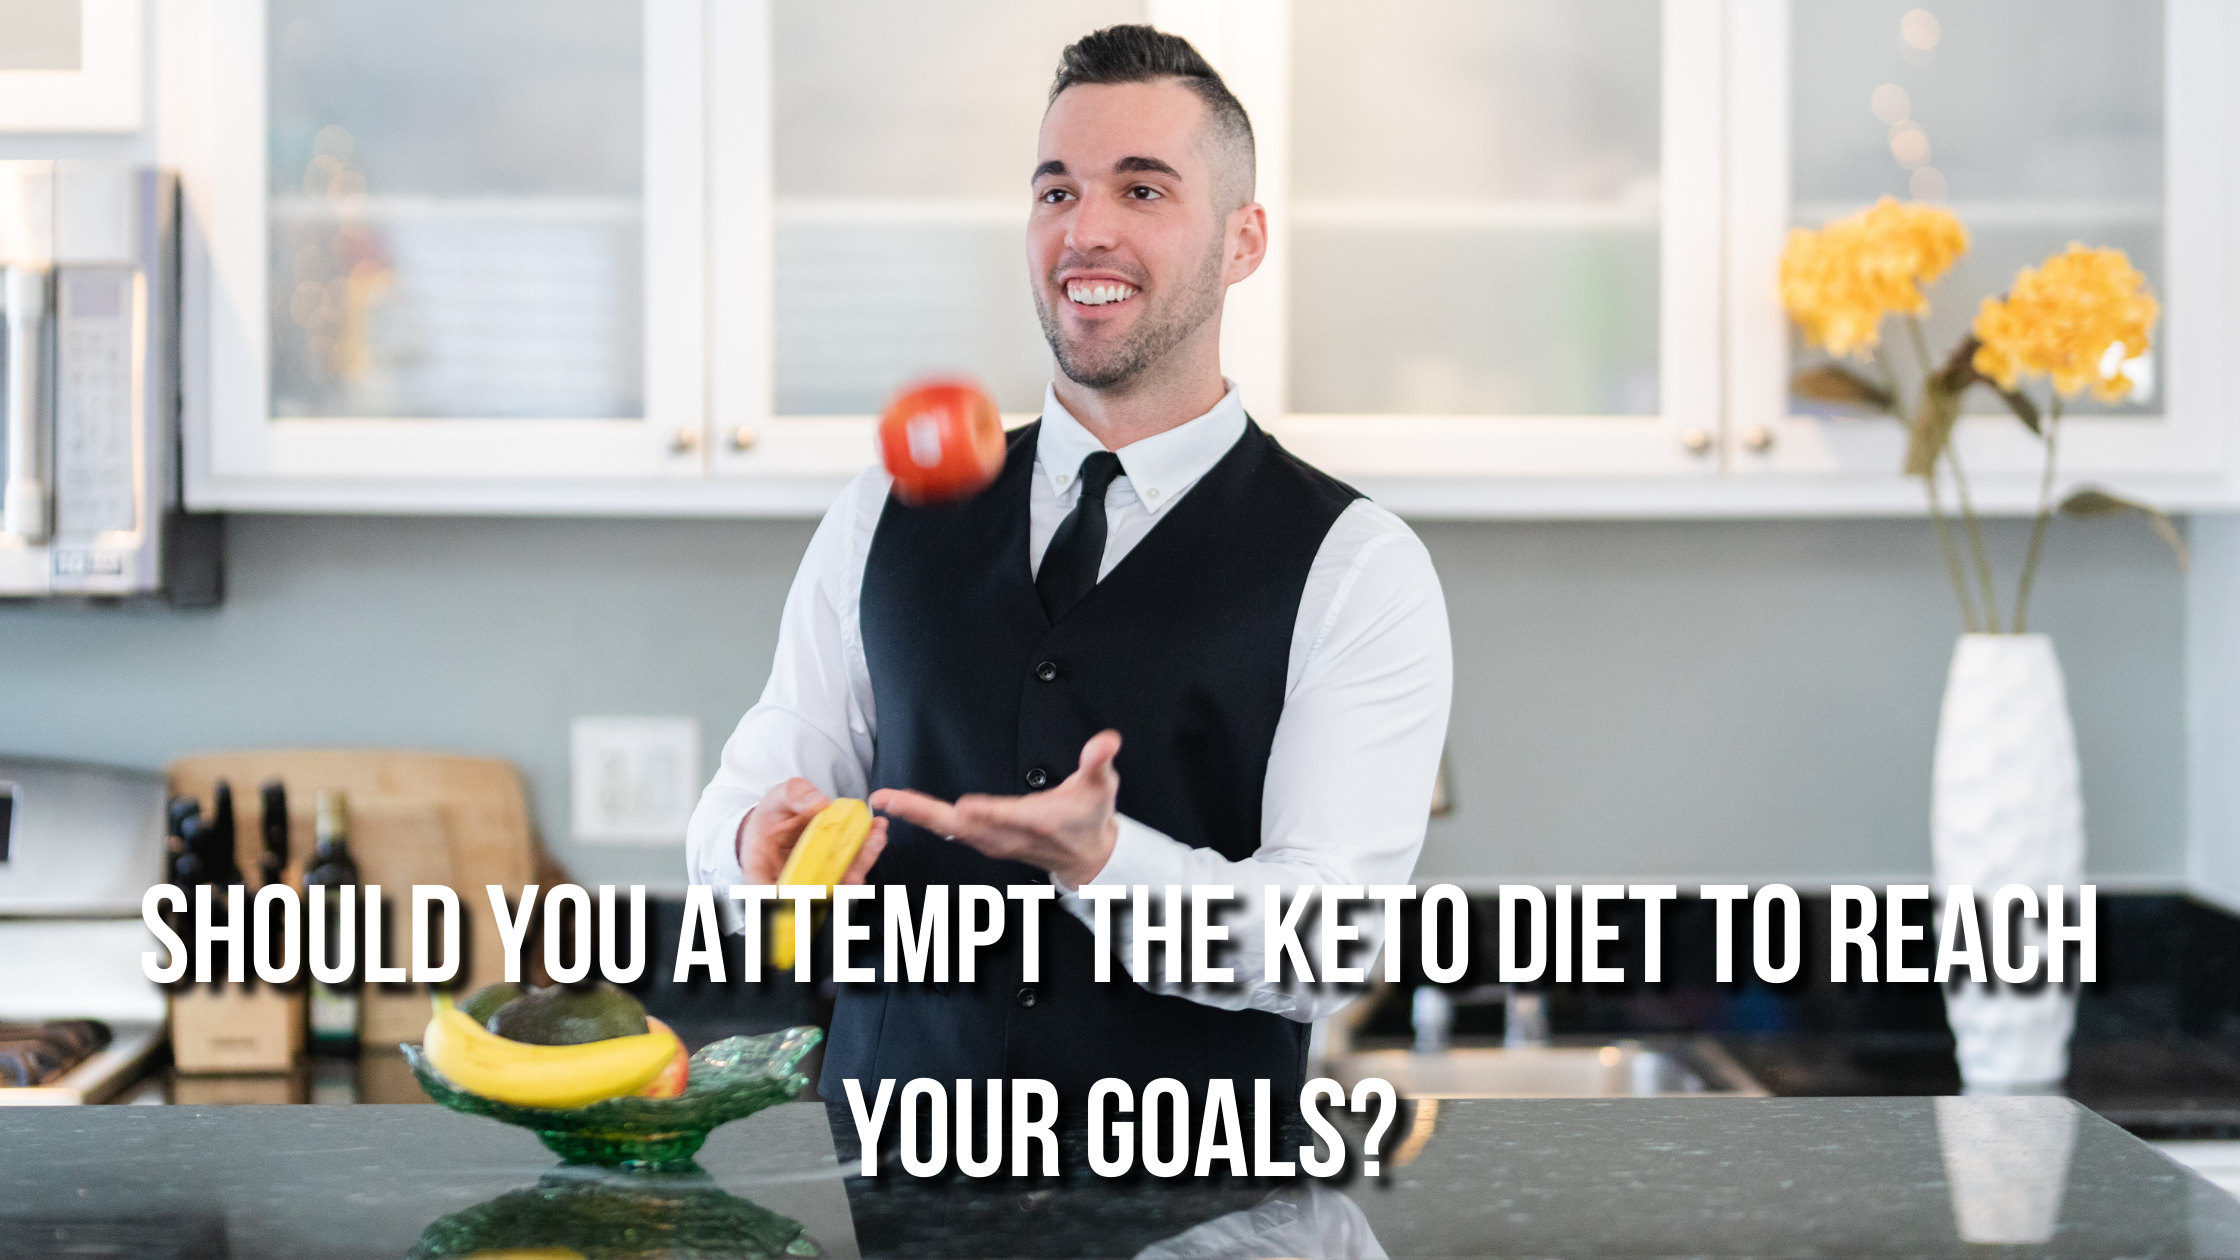 Should You Attempt The Keto Diet To Reach Your Goals?